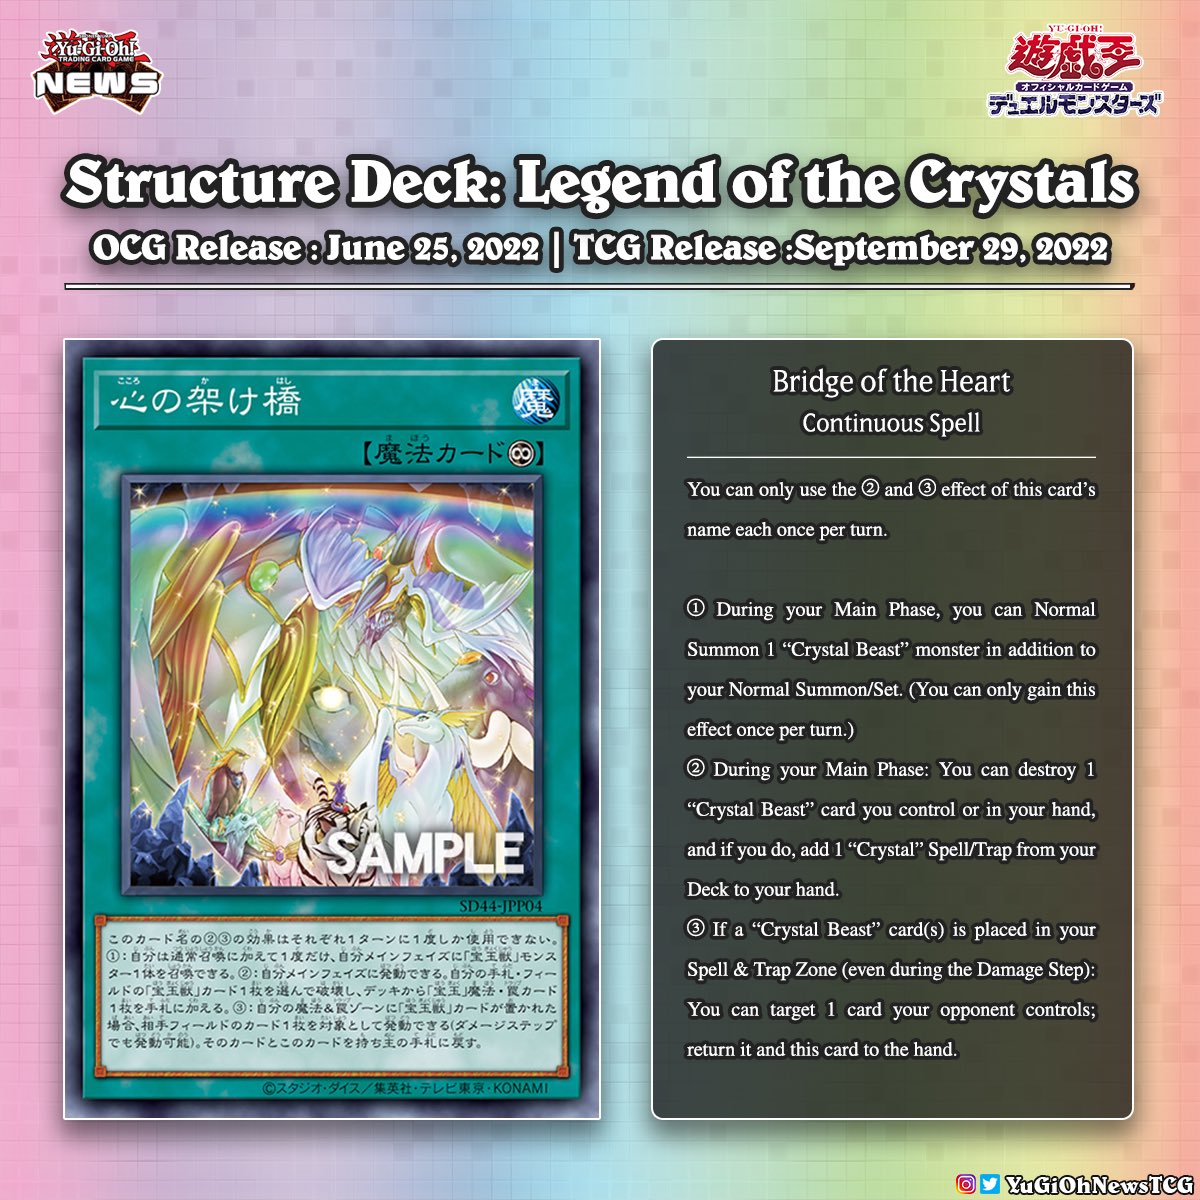 ❰𝗟𝗲𝗴𝗲𝗻𝗱 𝗼𝗳 𝘁𝗵𝗲 𝗖𝗿𝘆𝘀𝘁𝗮𝗹 𝗕𝗲𝗮𝘀𝘁𝘀❱One more card has been revealed for the upcoming ...